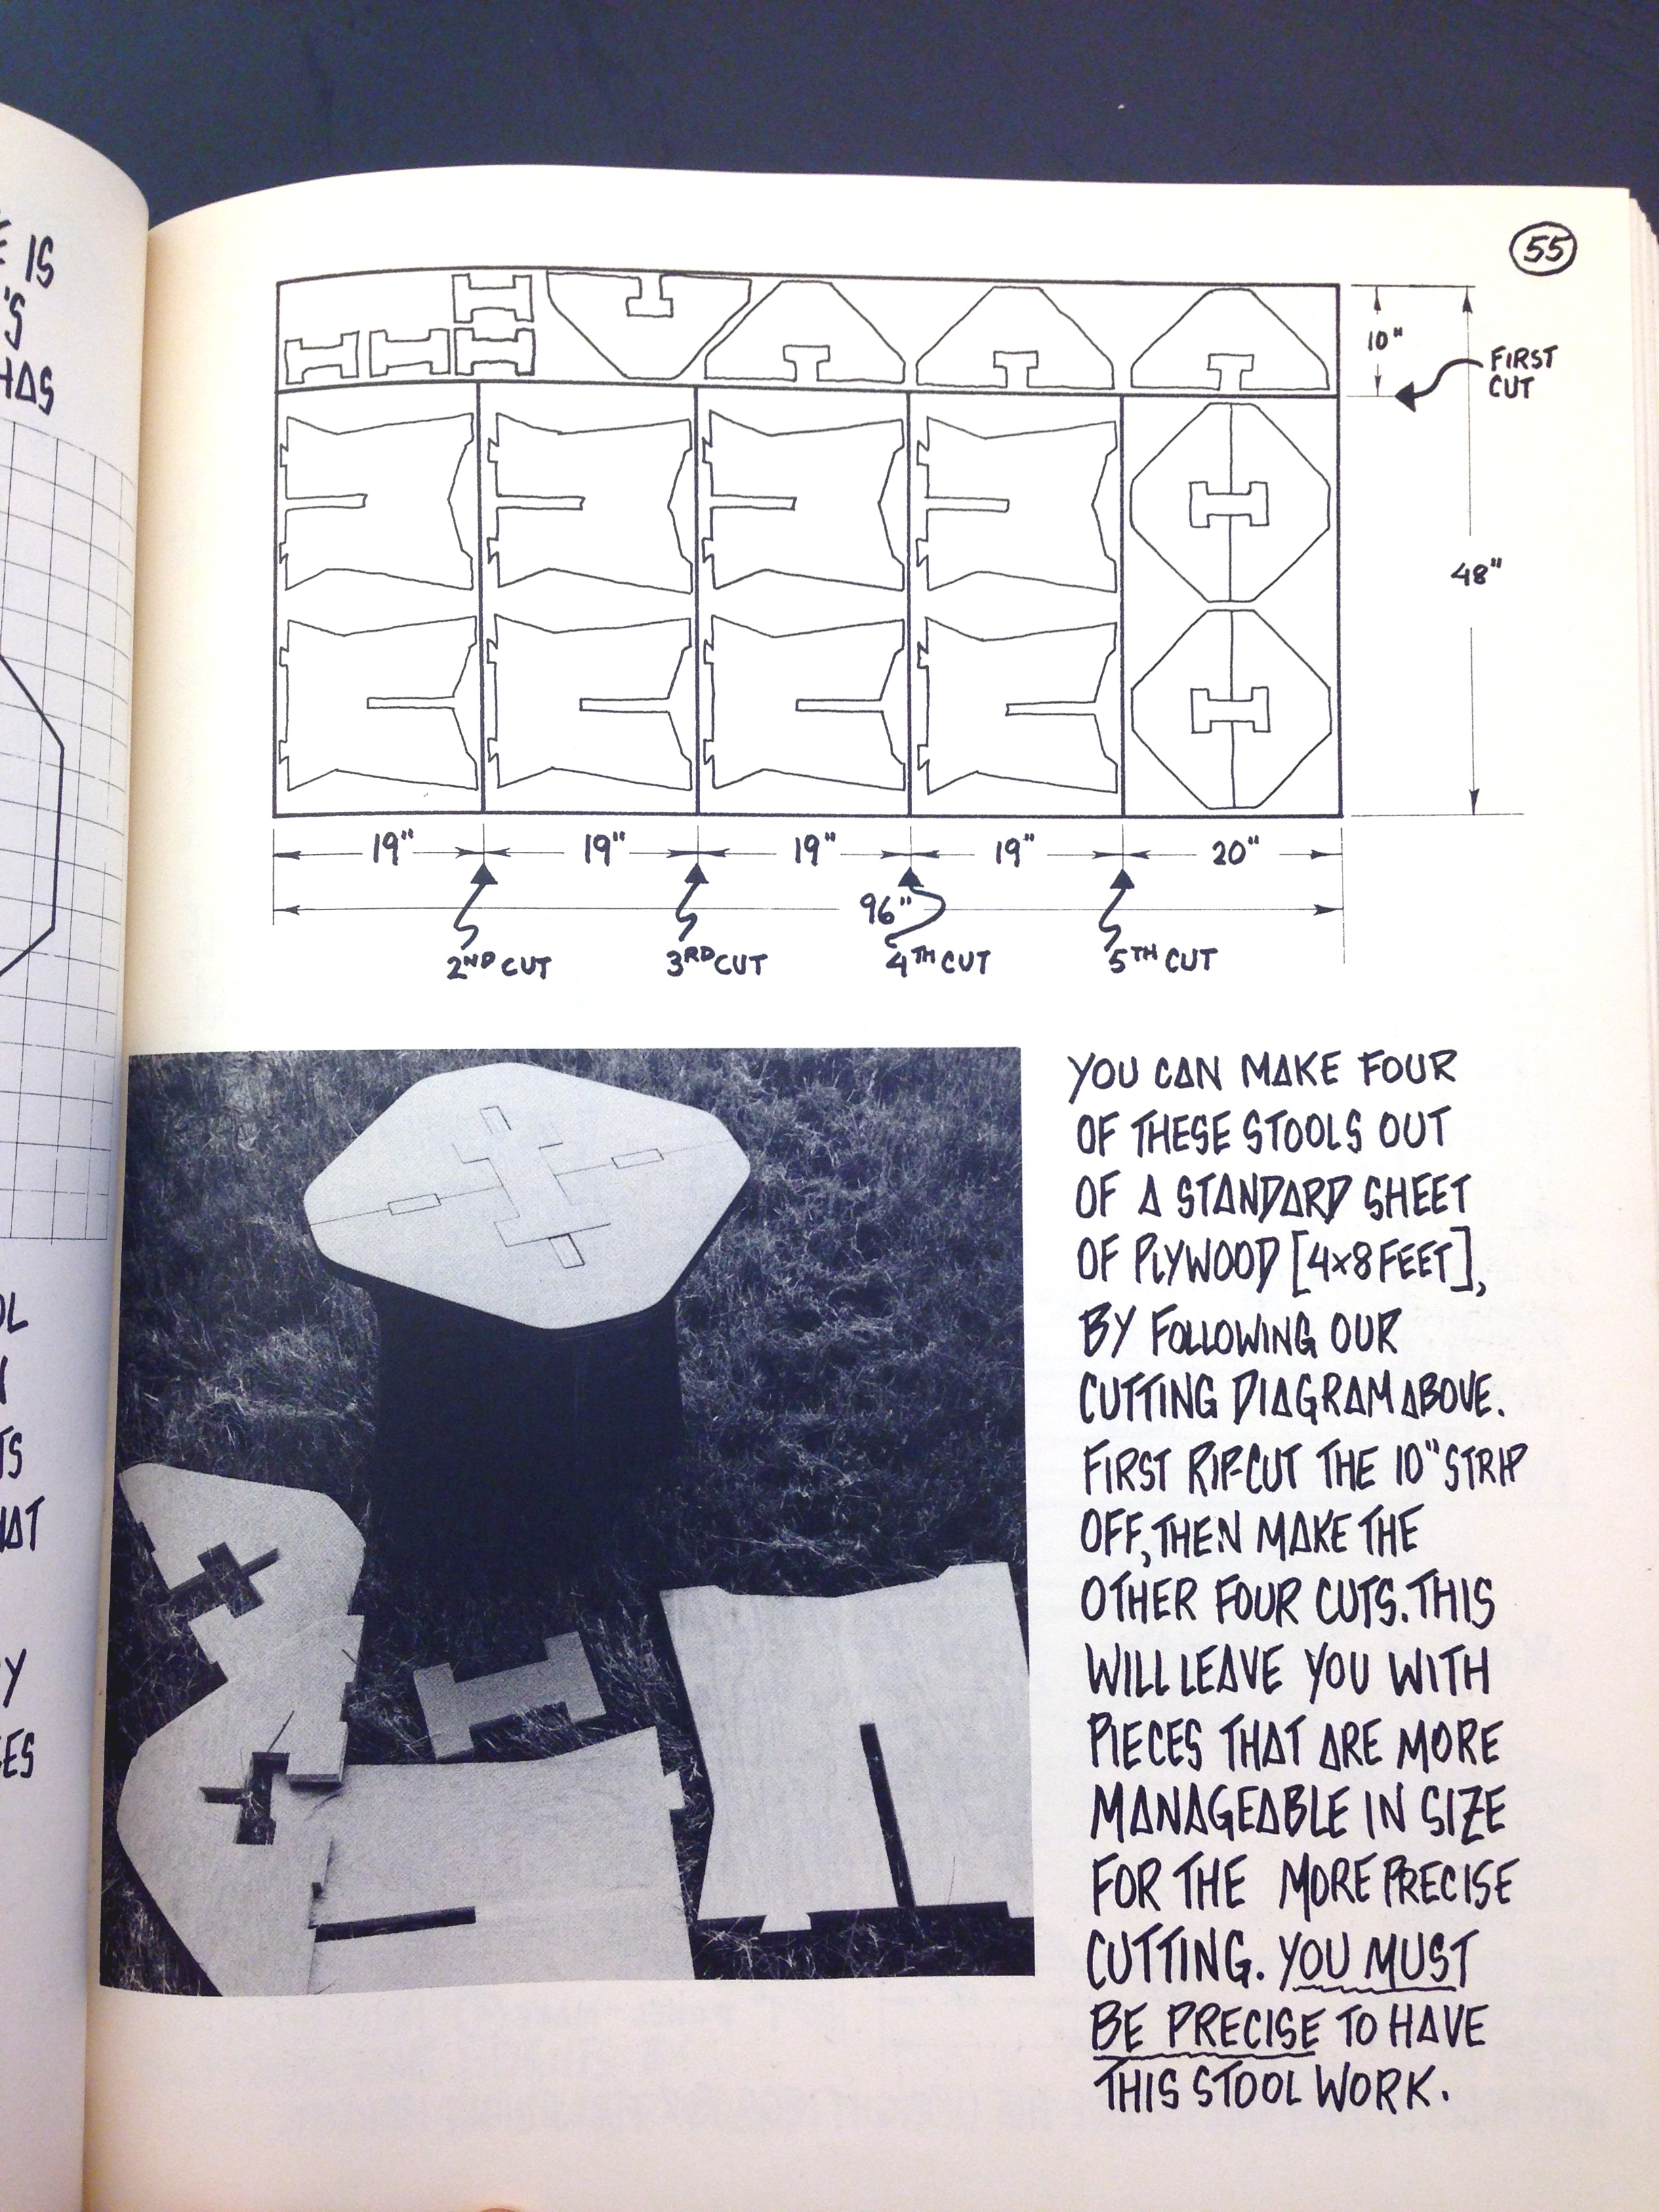 a page from Papanek's book, Nomadic Furniture. There's a drawing here of the way to fit all the parts for four stools from one standard piece of plywood, and then an image of the puzzle pieces for the stool, unassembled and assembled. There are handwritten directions from Papanek about how to make this stool.